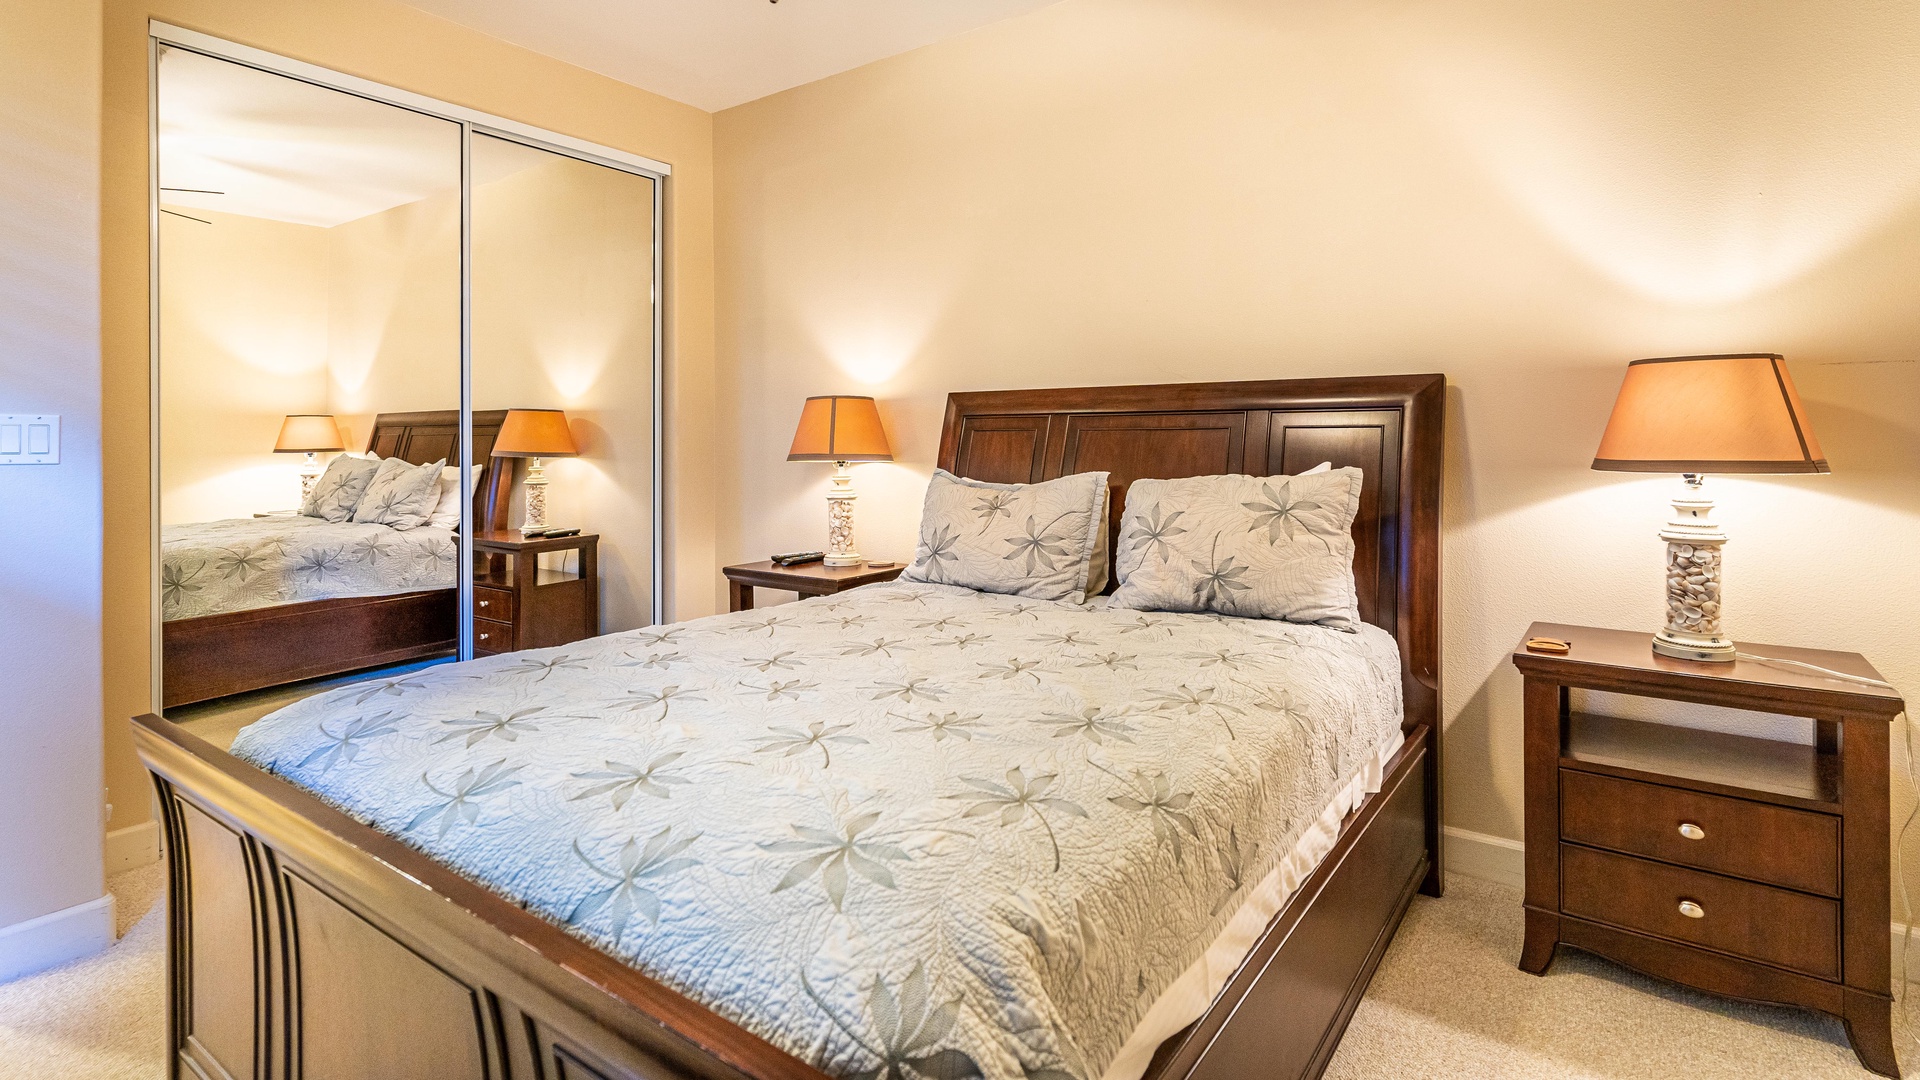 Kapolei Vacation Rentals, Ko Olina Kai 1033C - Have a restful slumber in the beautiful downstairs guest bedroom.